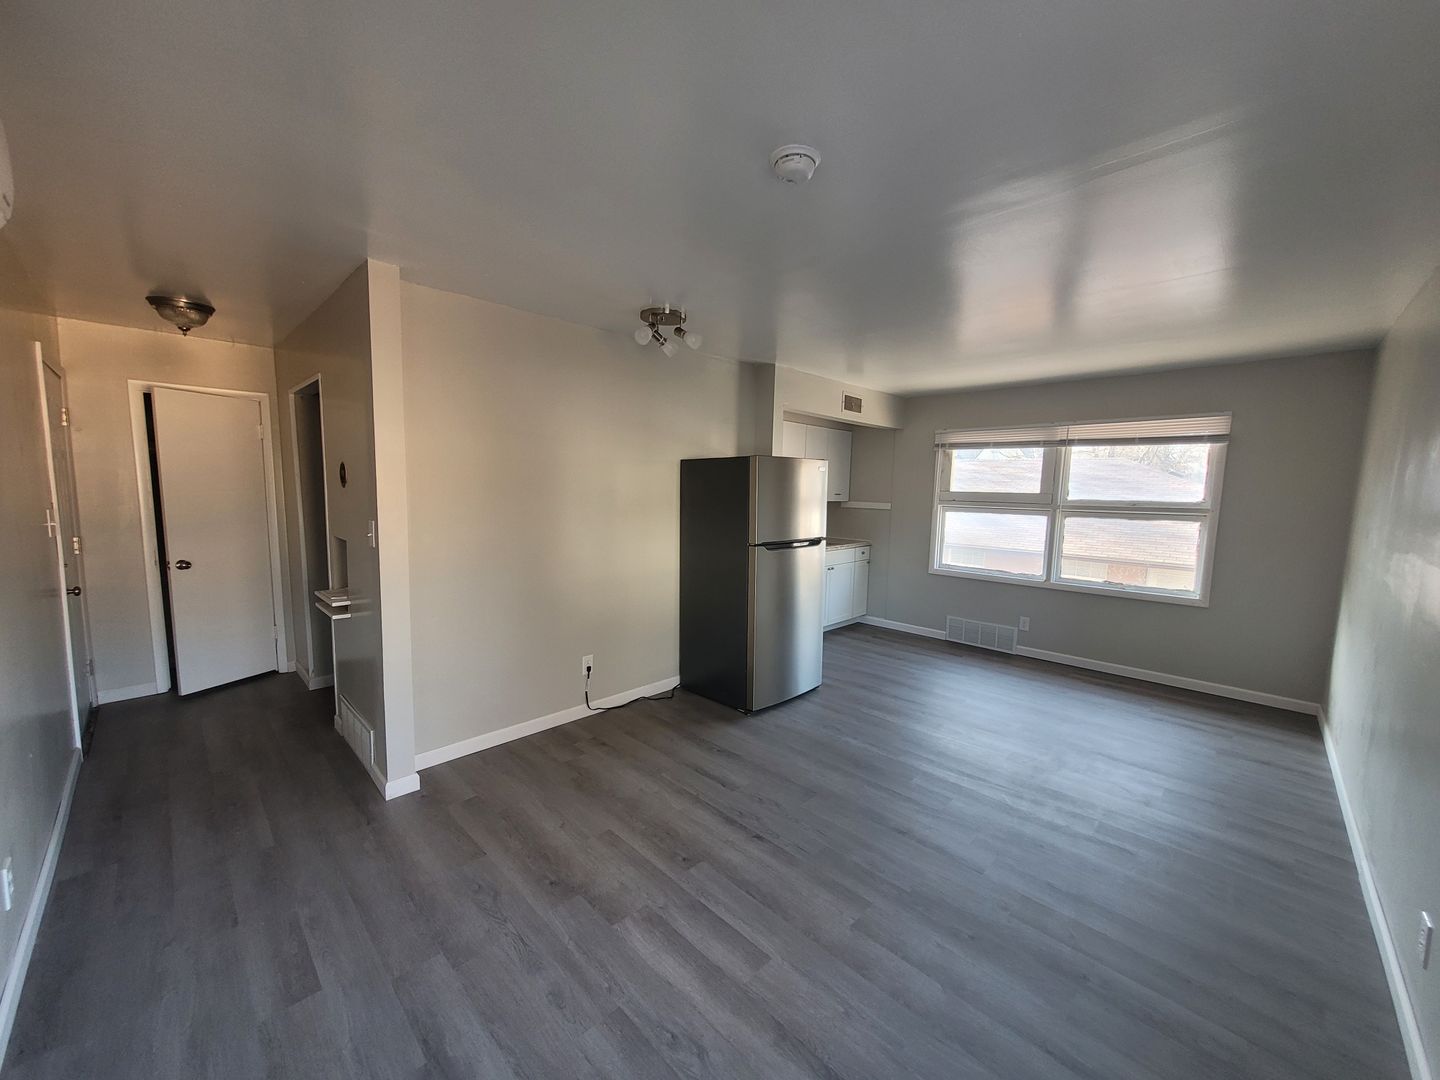 $495 - STUDIO - Newly remodeled multi-family home